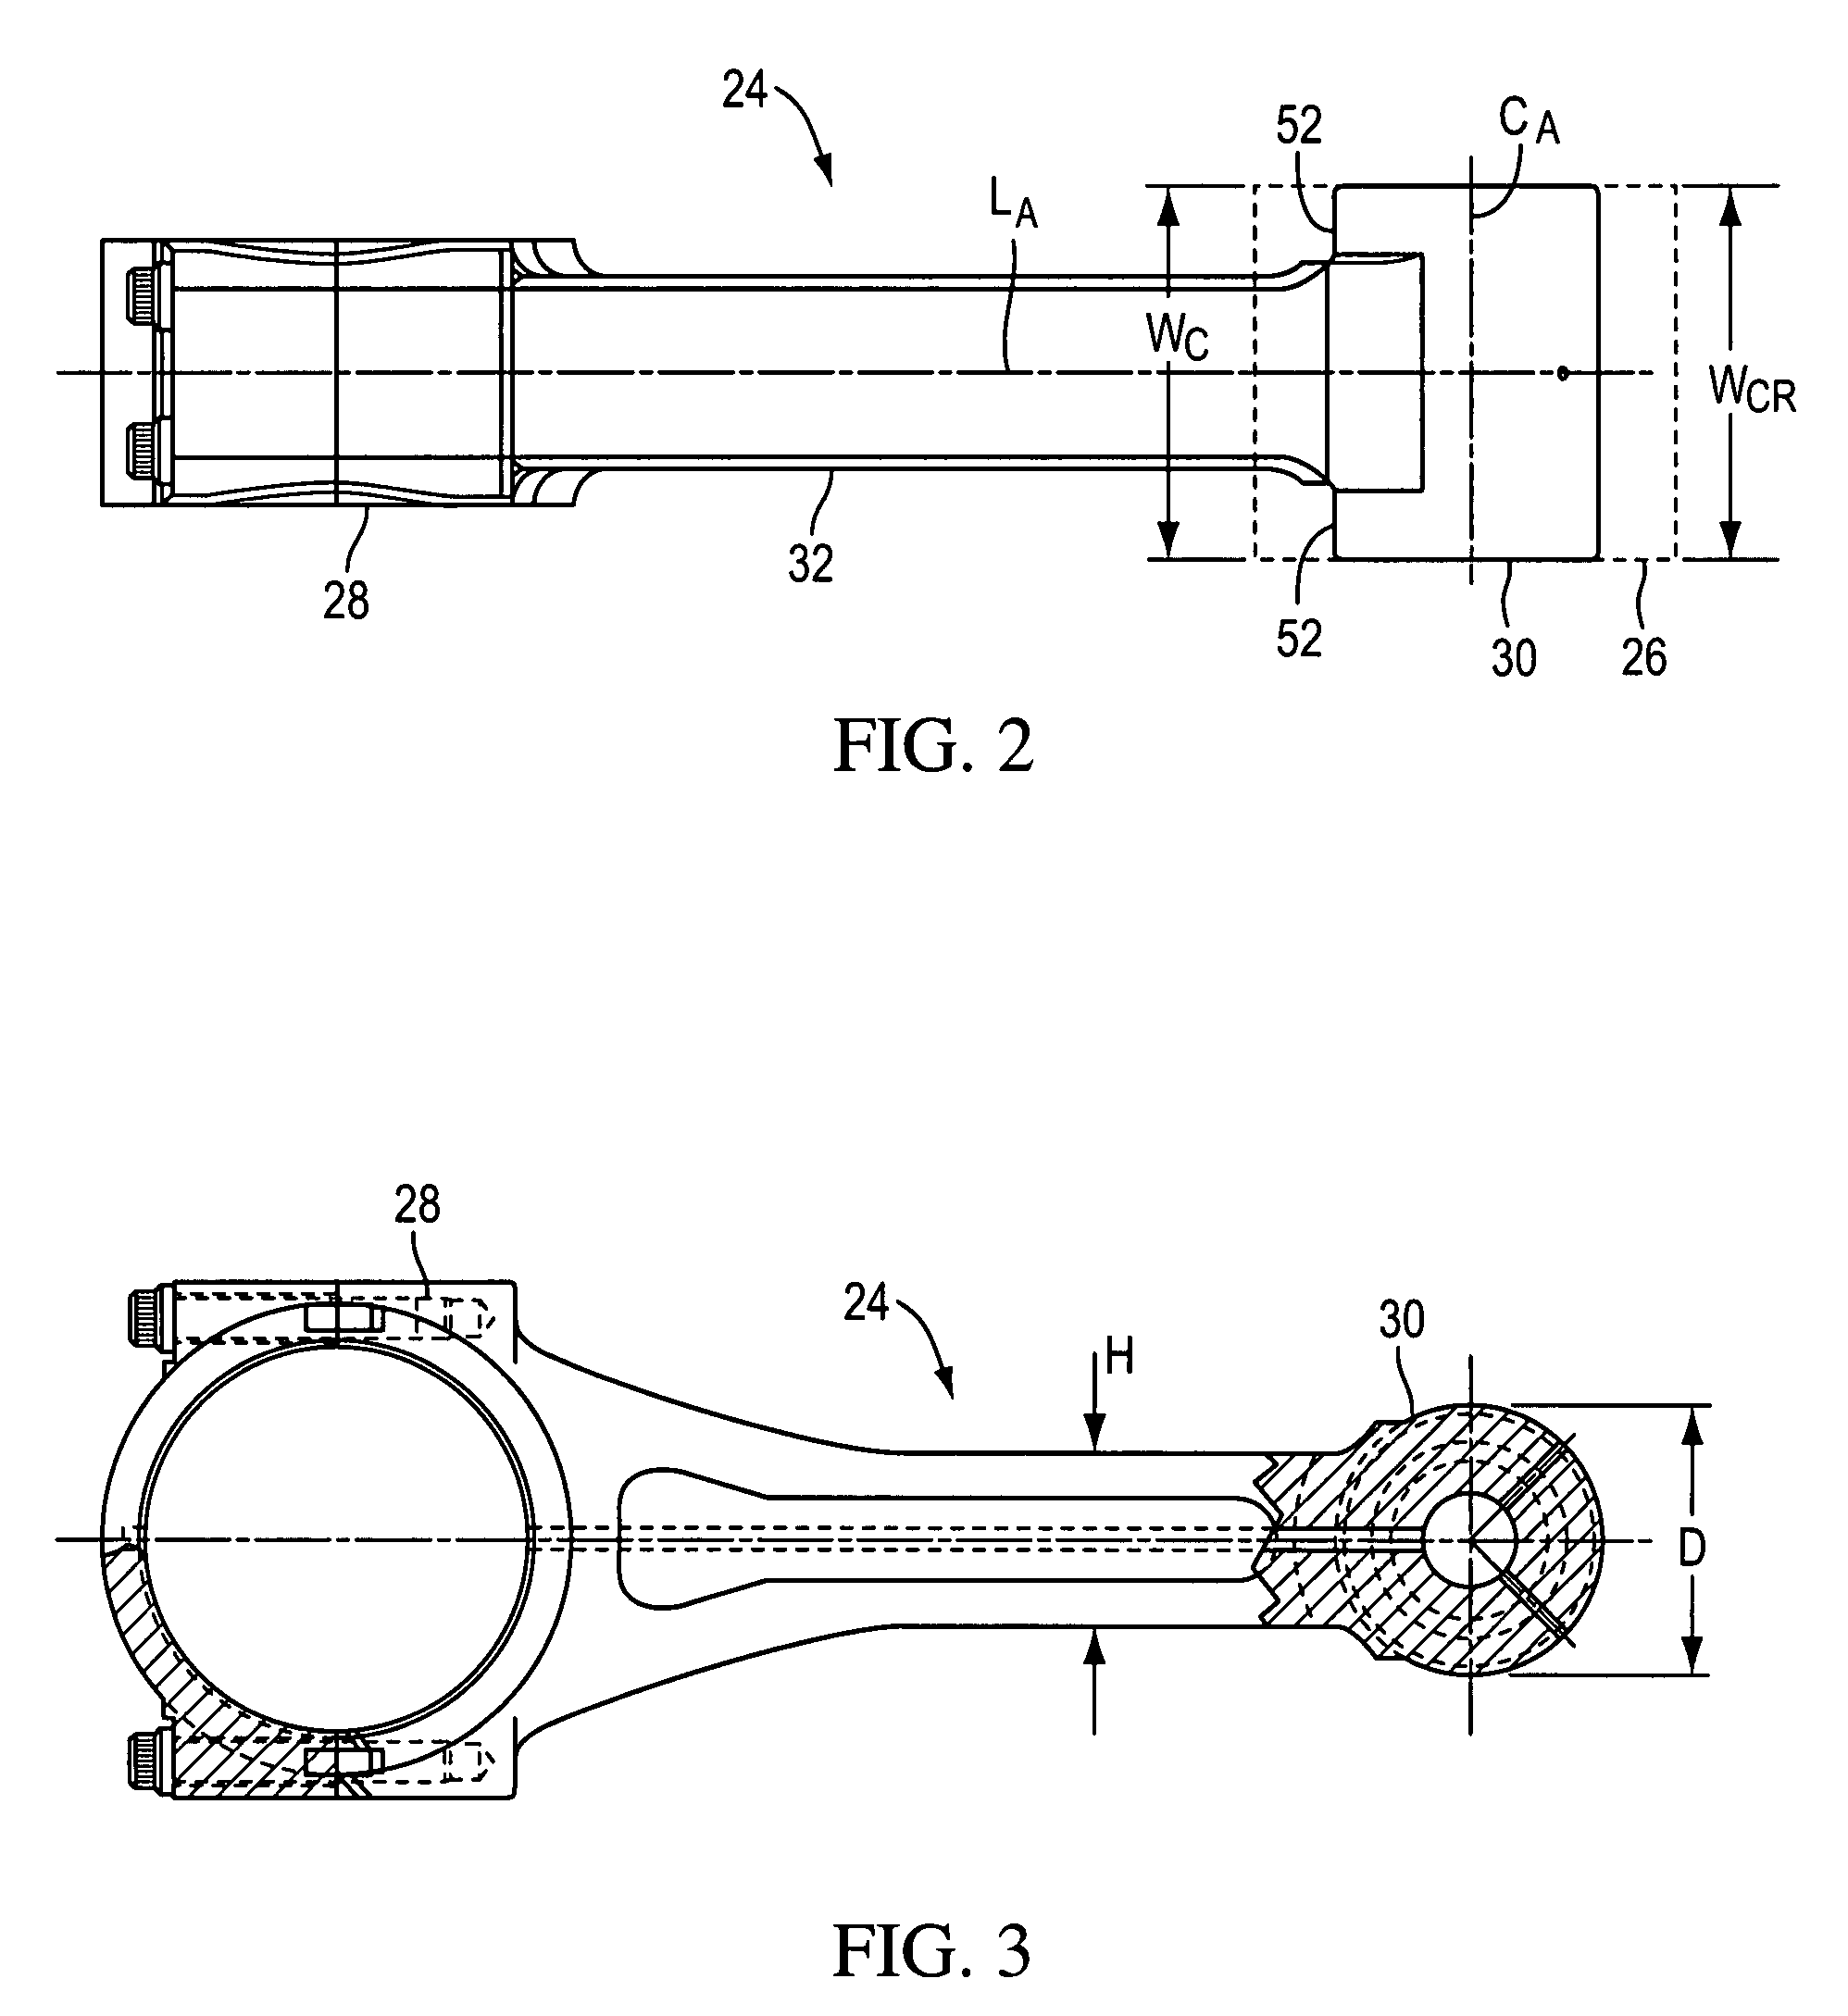 Pump crosshead and connecting rod assembly